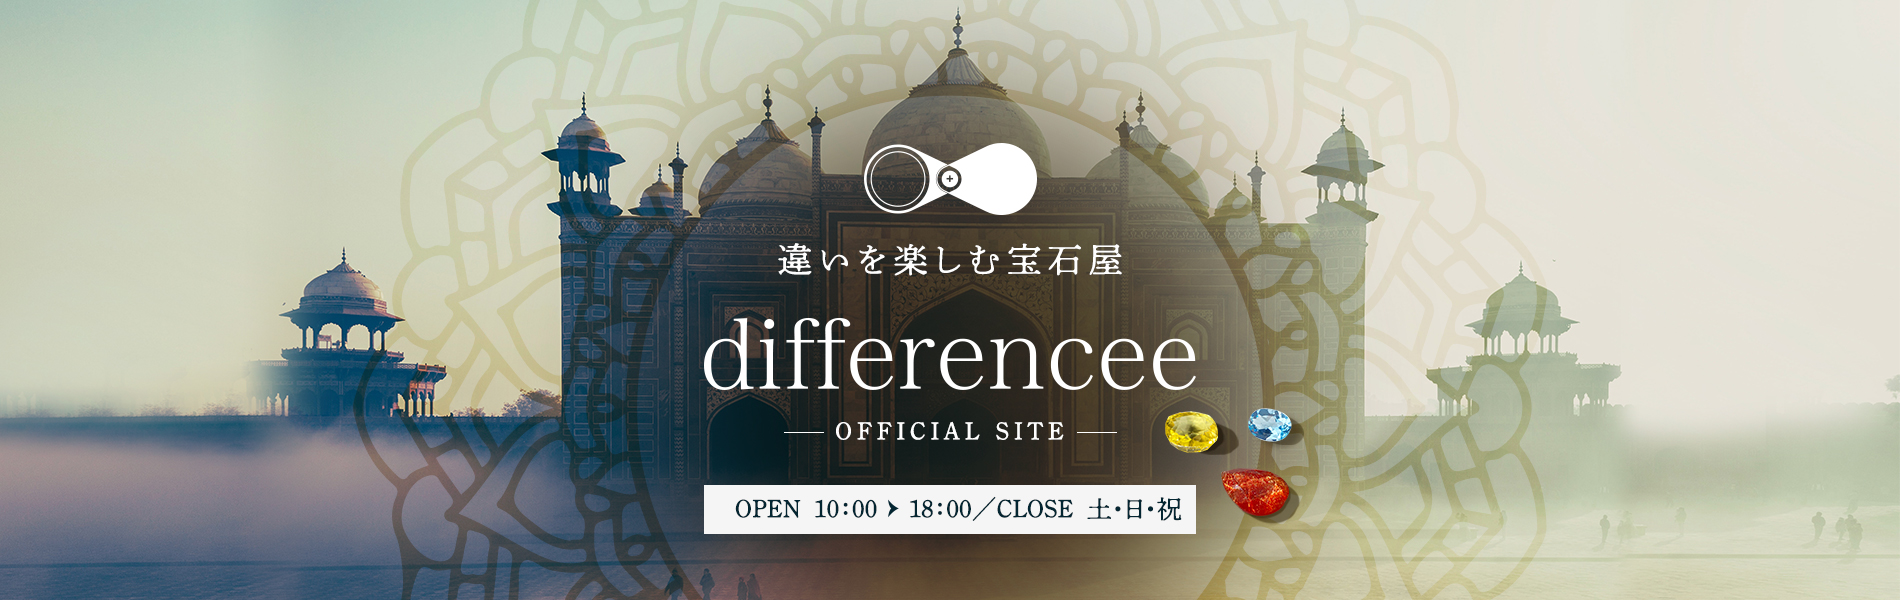 differecee official site